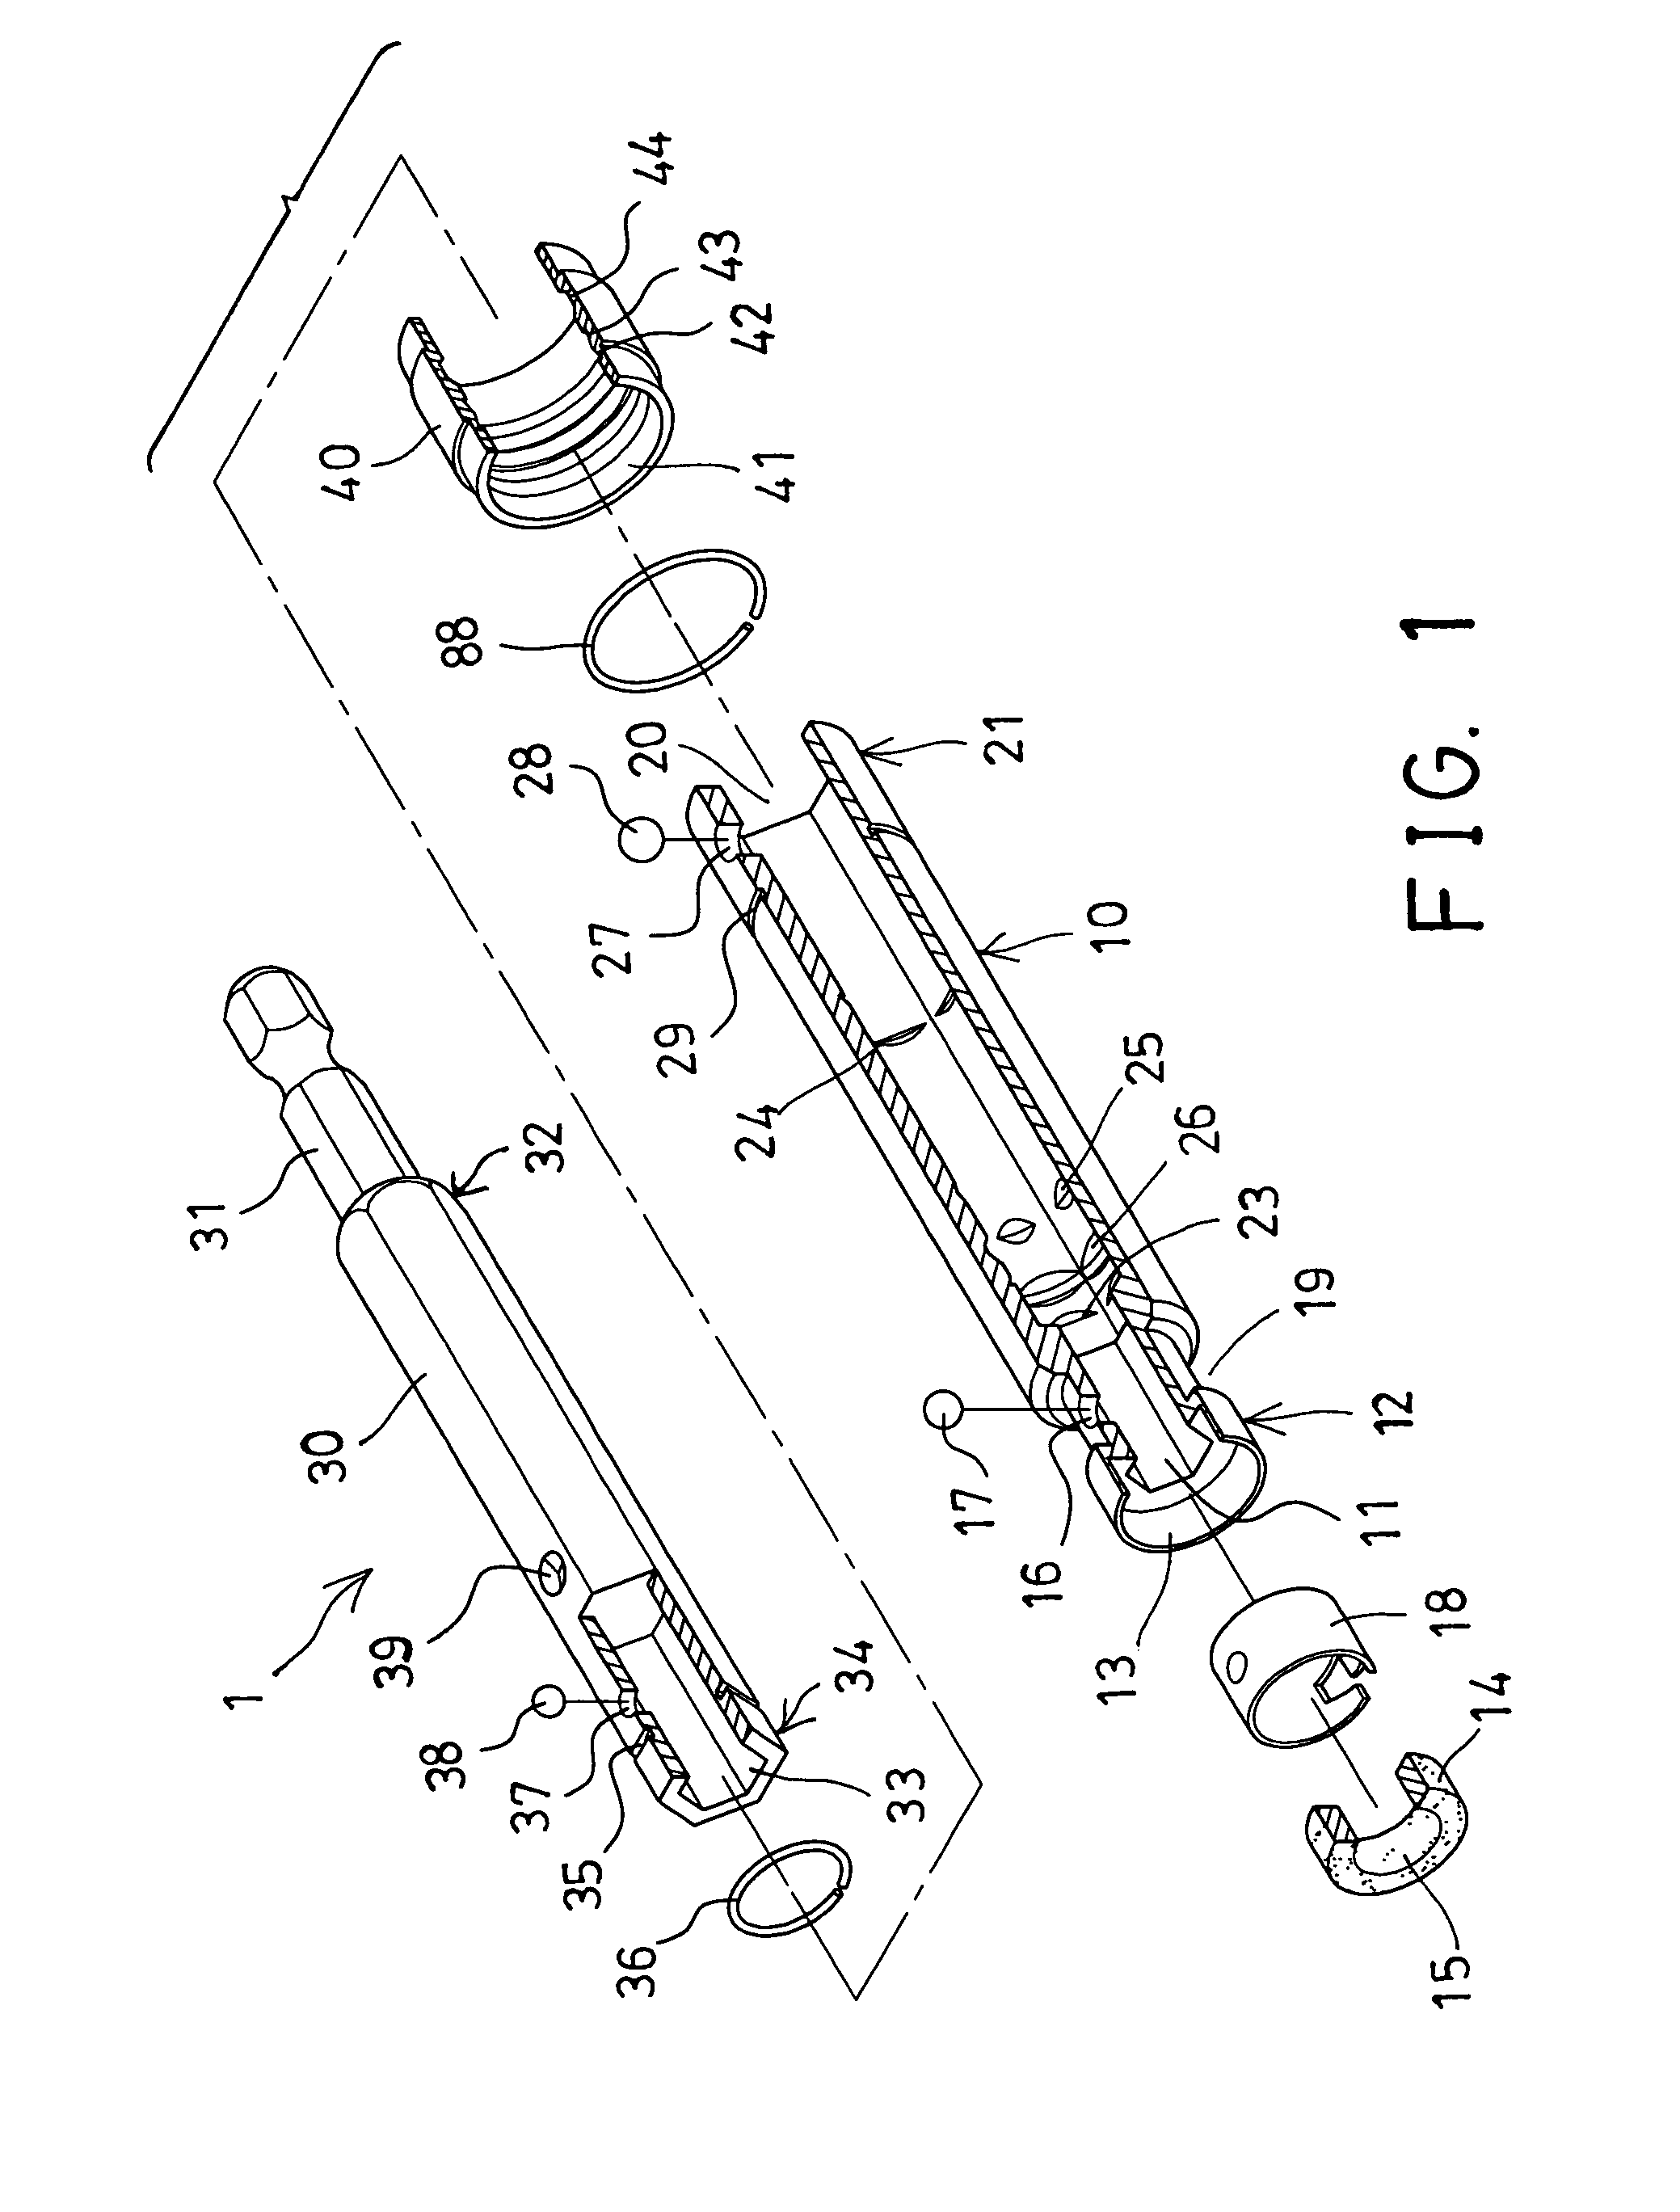 Tool retaining or connecting device